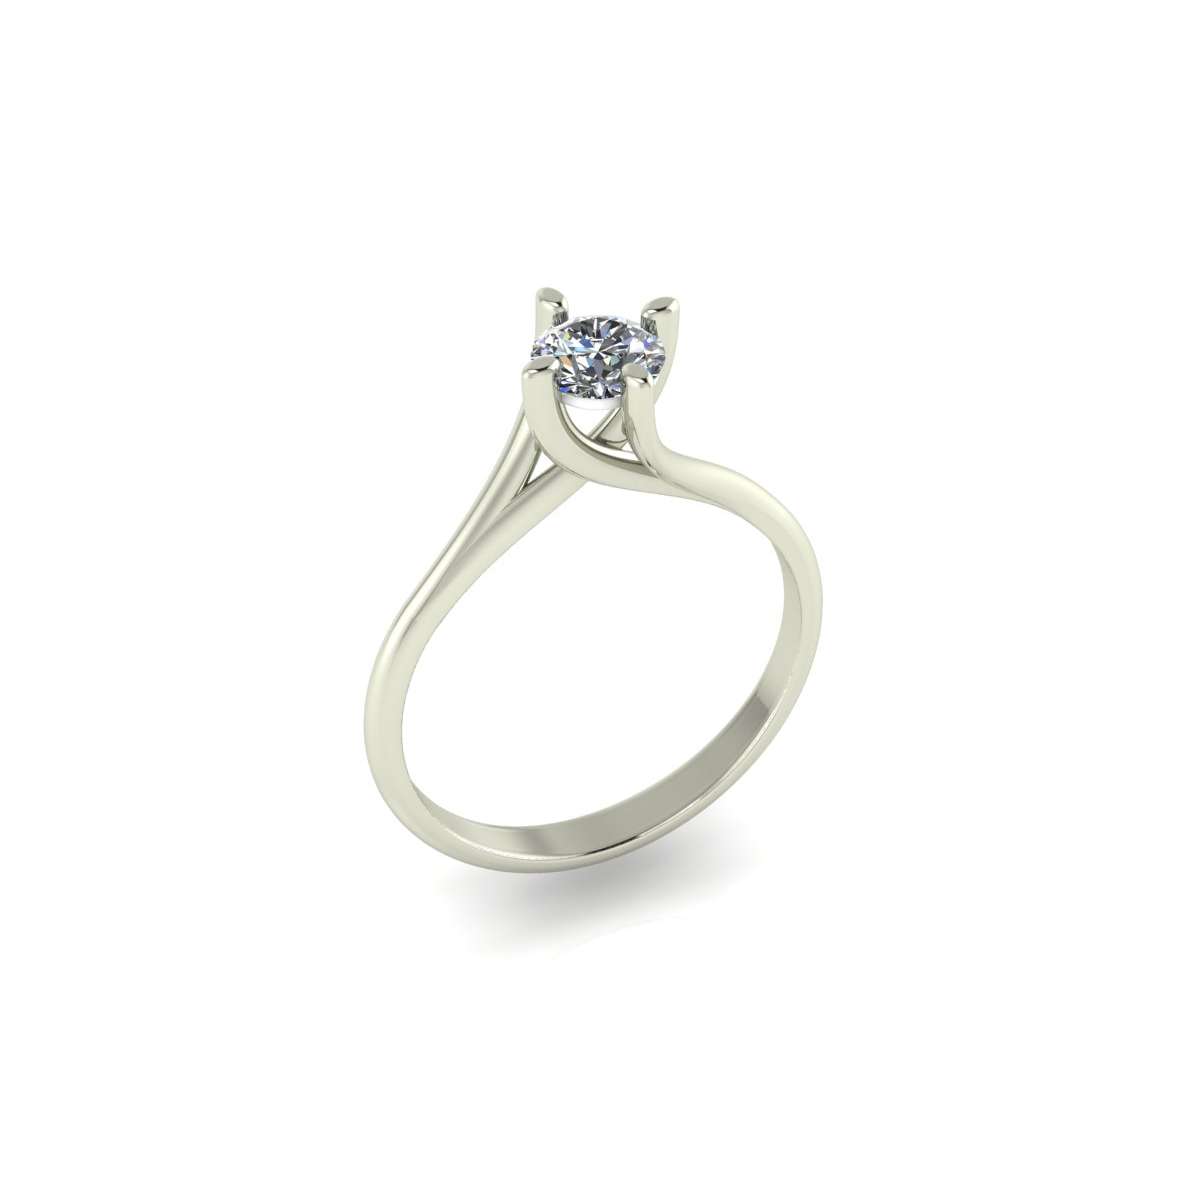 Valentino solitaire ring in white gold and diamond GIA ct. 0.42 G-SI2